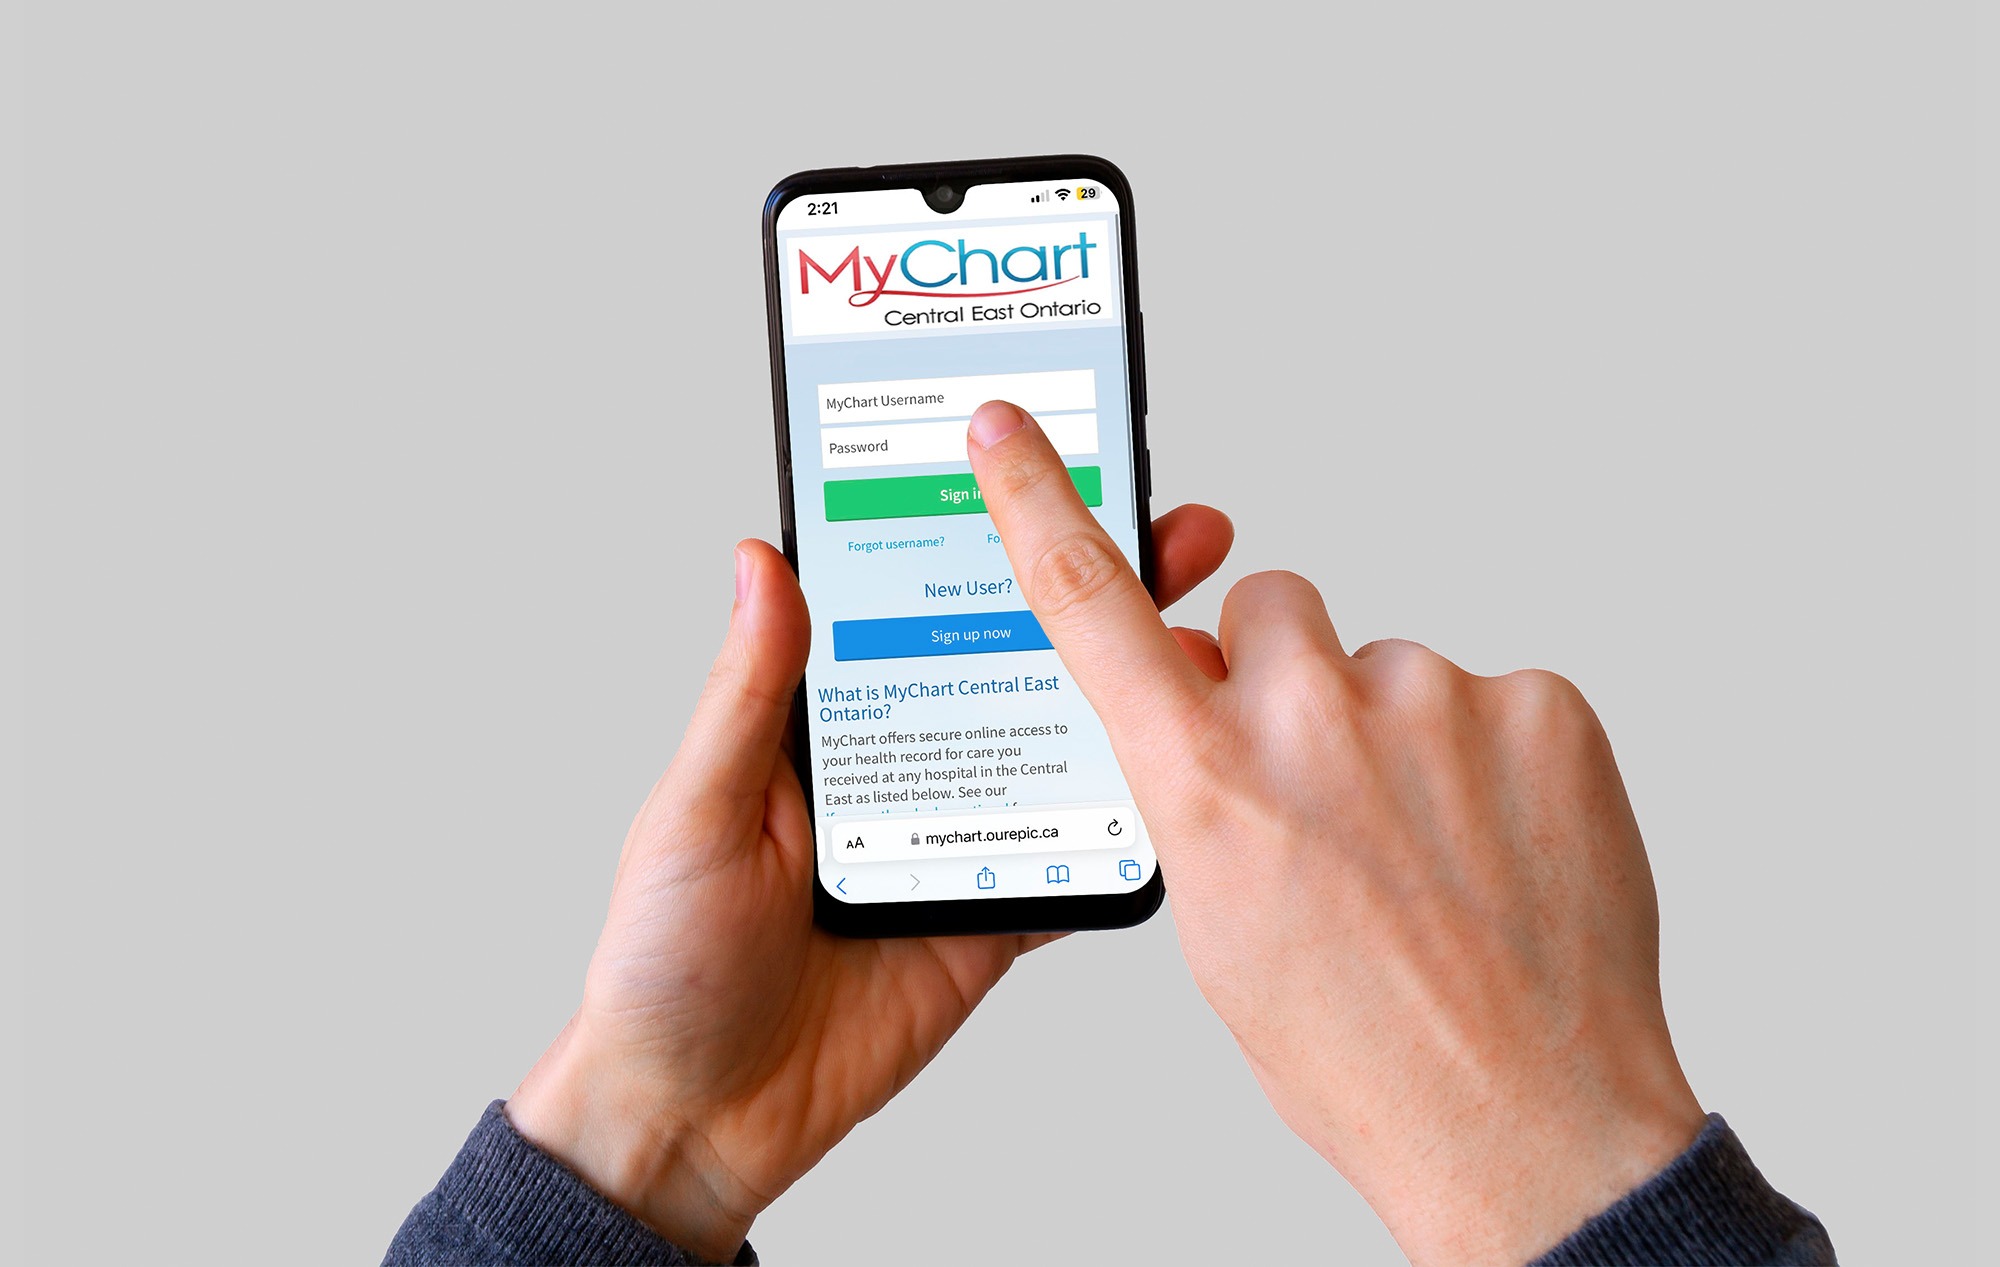 A person's hands using MyChart on their mobile device